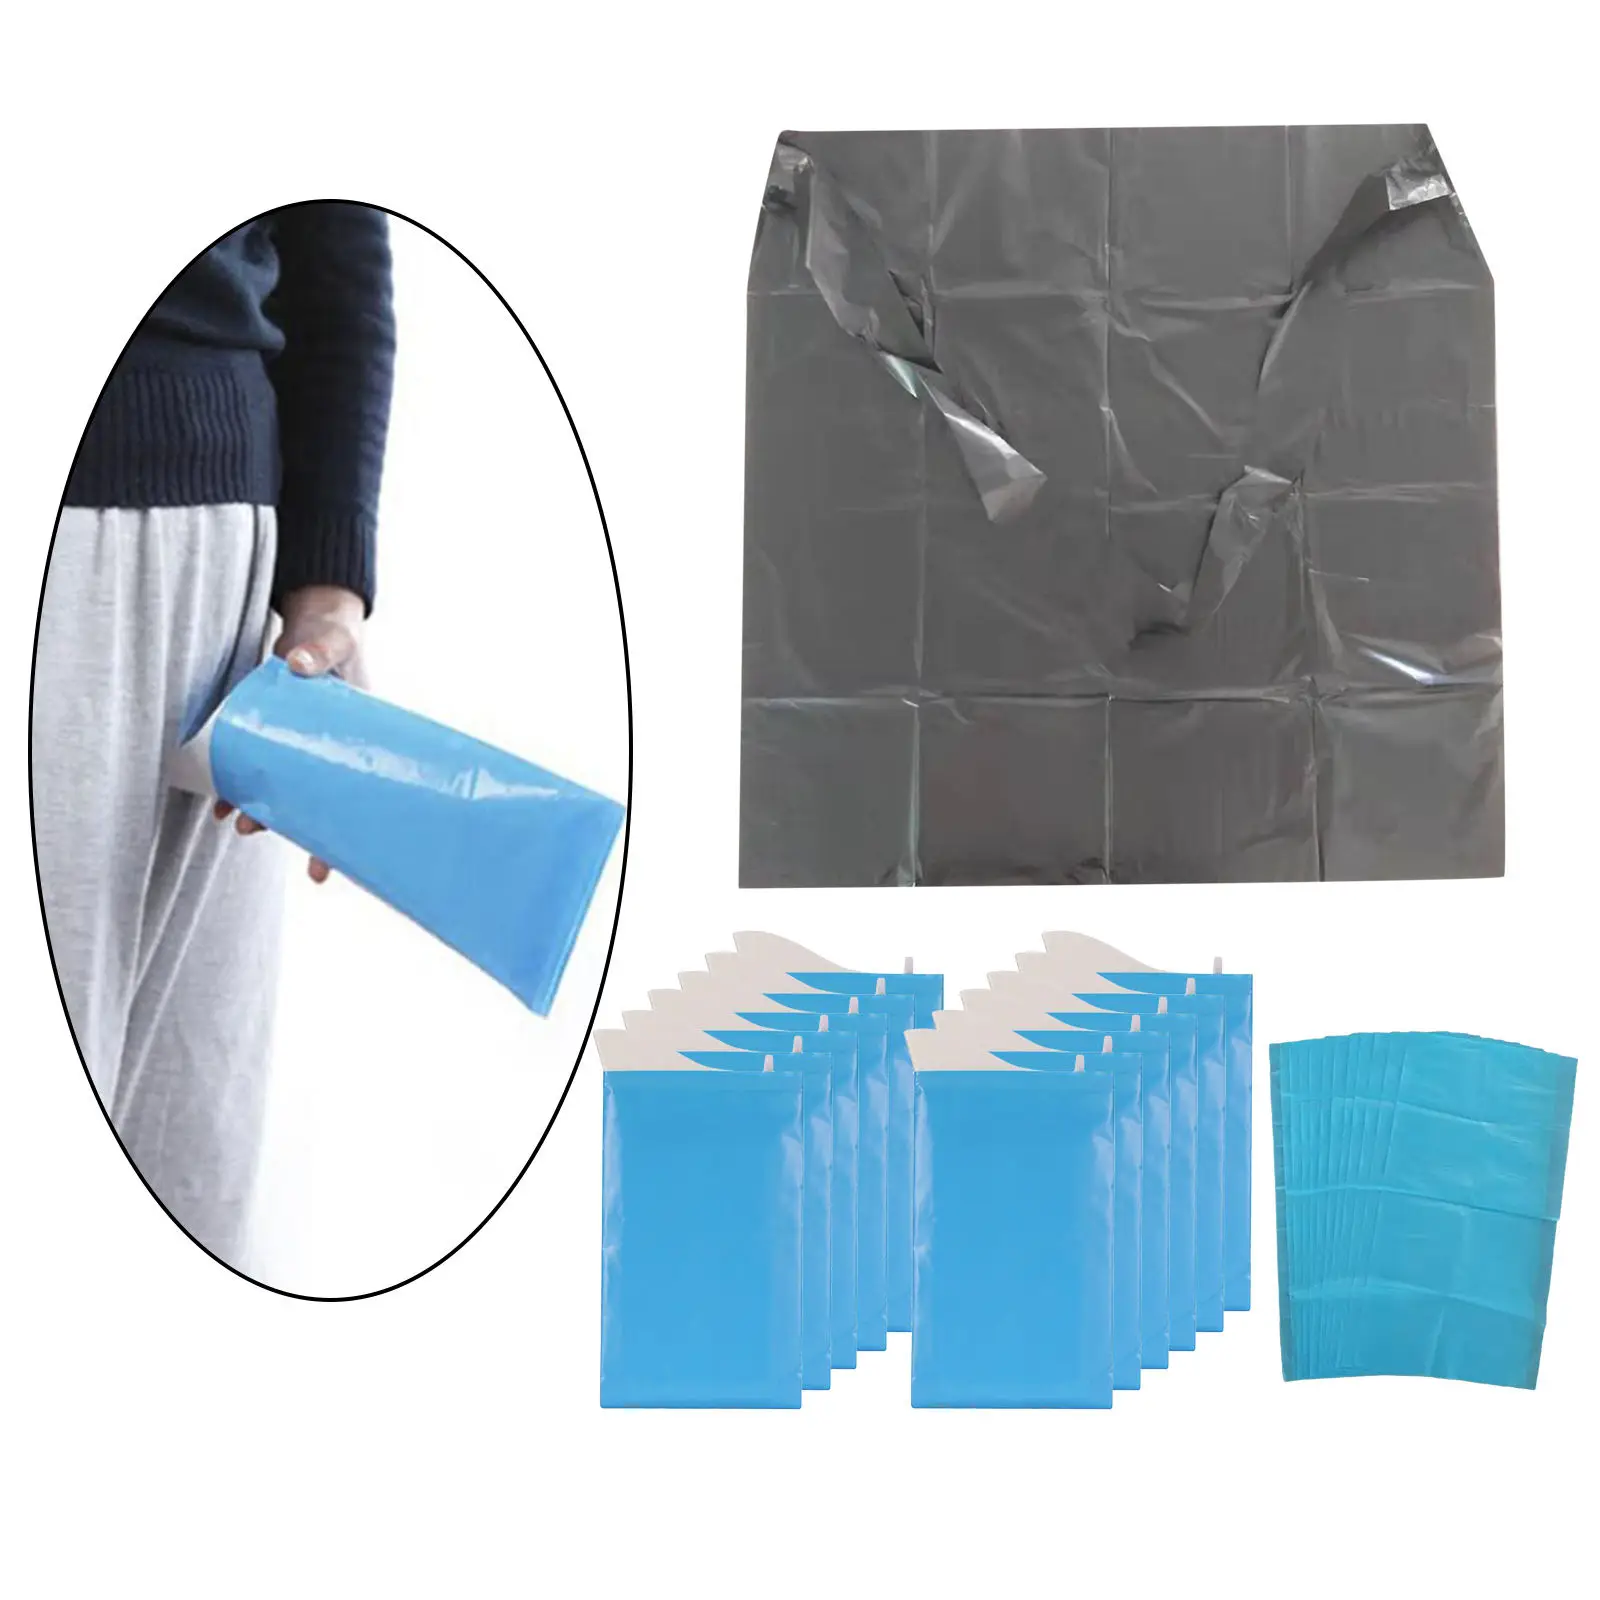 12Pcs Unisex Disposable Urine Bags Camping Pee Bags Urinal Toilet Emergency for Kids Outdoor Sports Car Backpacking Hiking